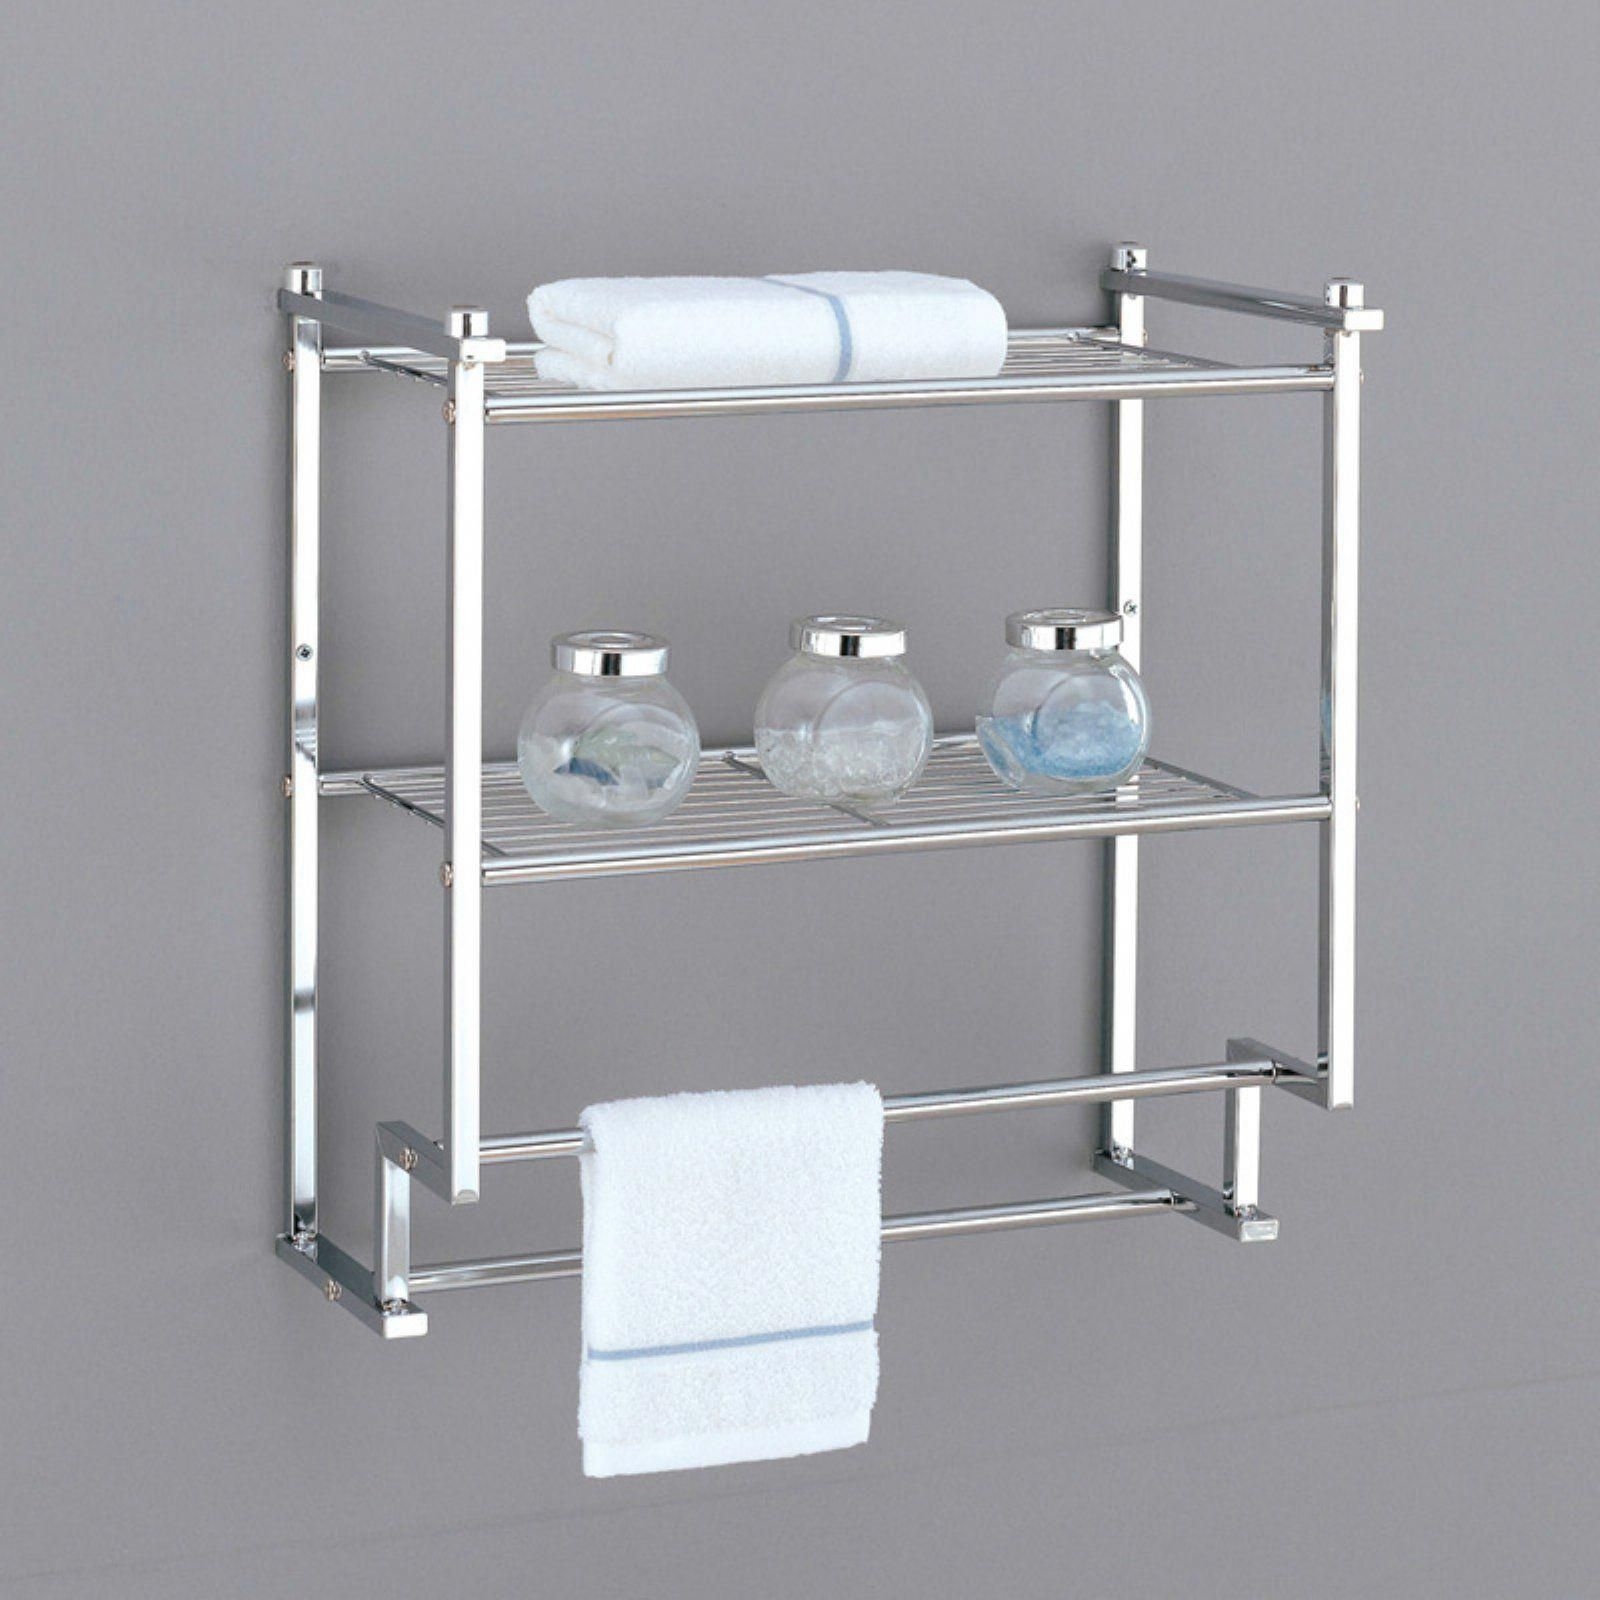 Bathroom Wall Shelves And Storage Ideas On Foter